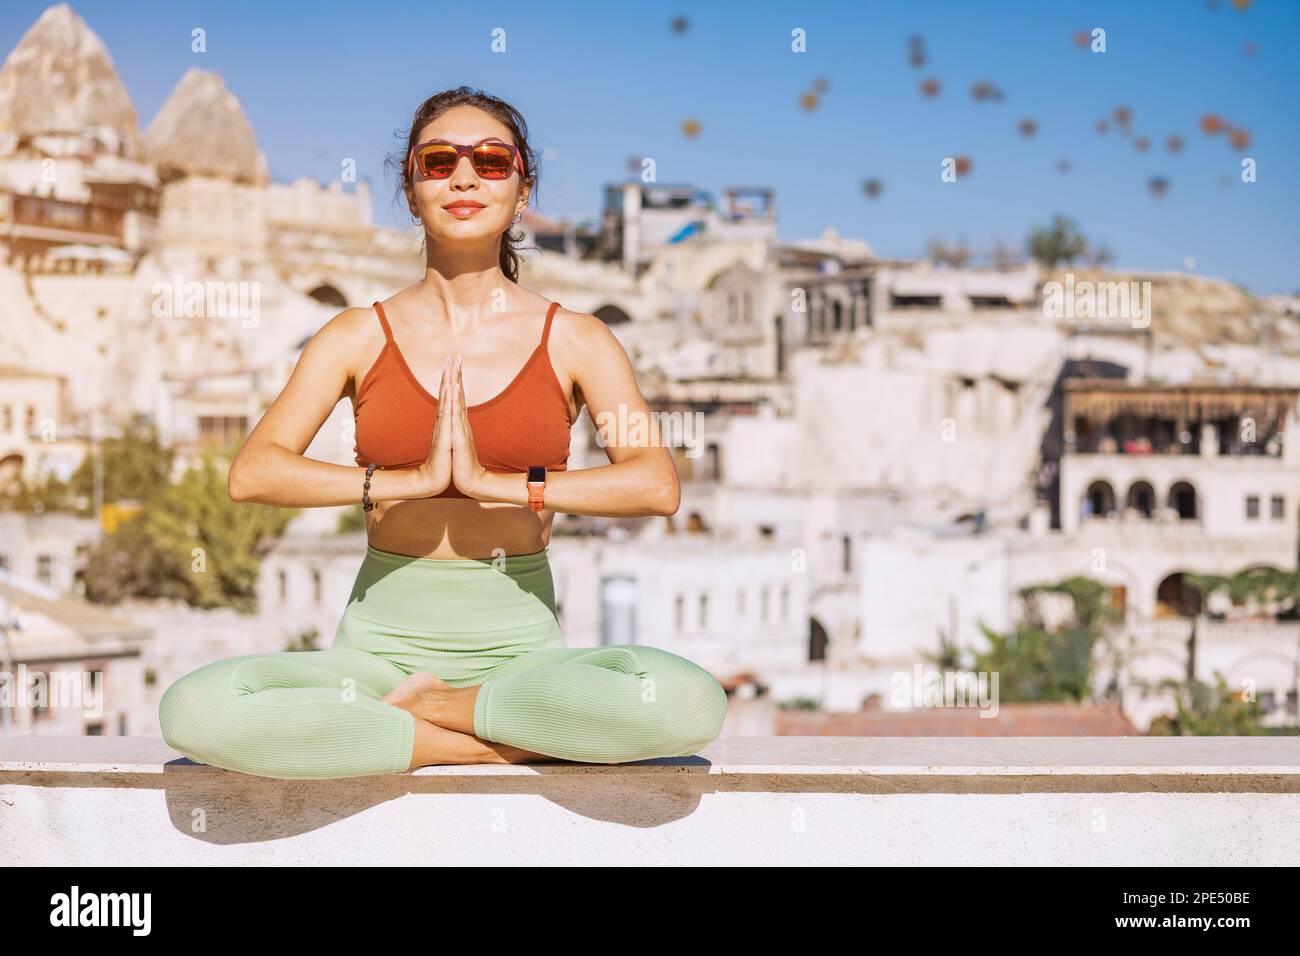 Happy girl does yoga exercises and meditation in Cappadocia, Turkey, with hot air balloons flying in the background Stock Photo